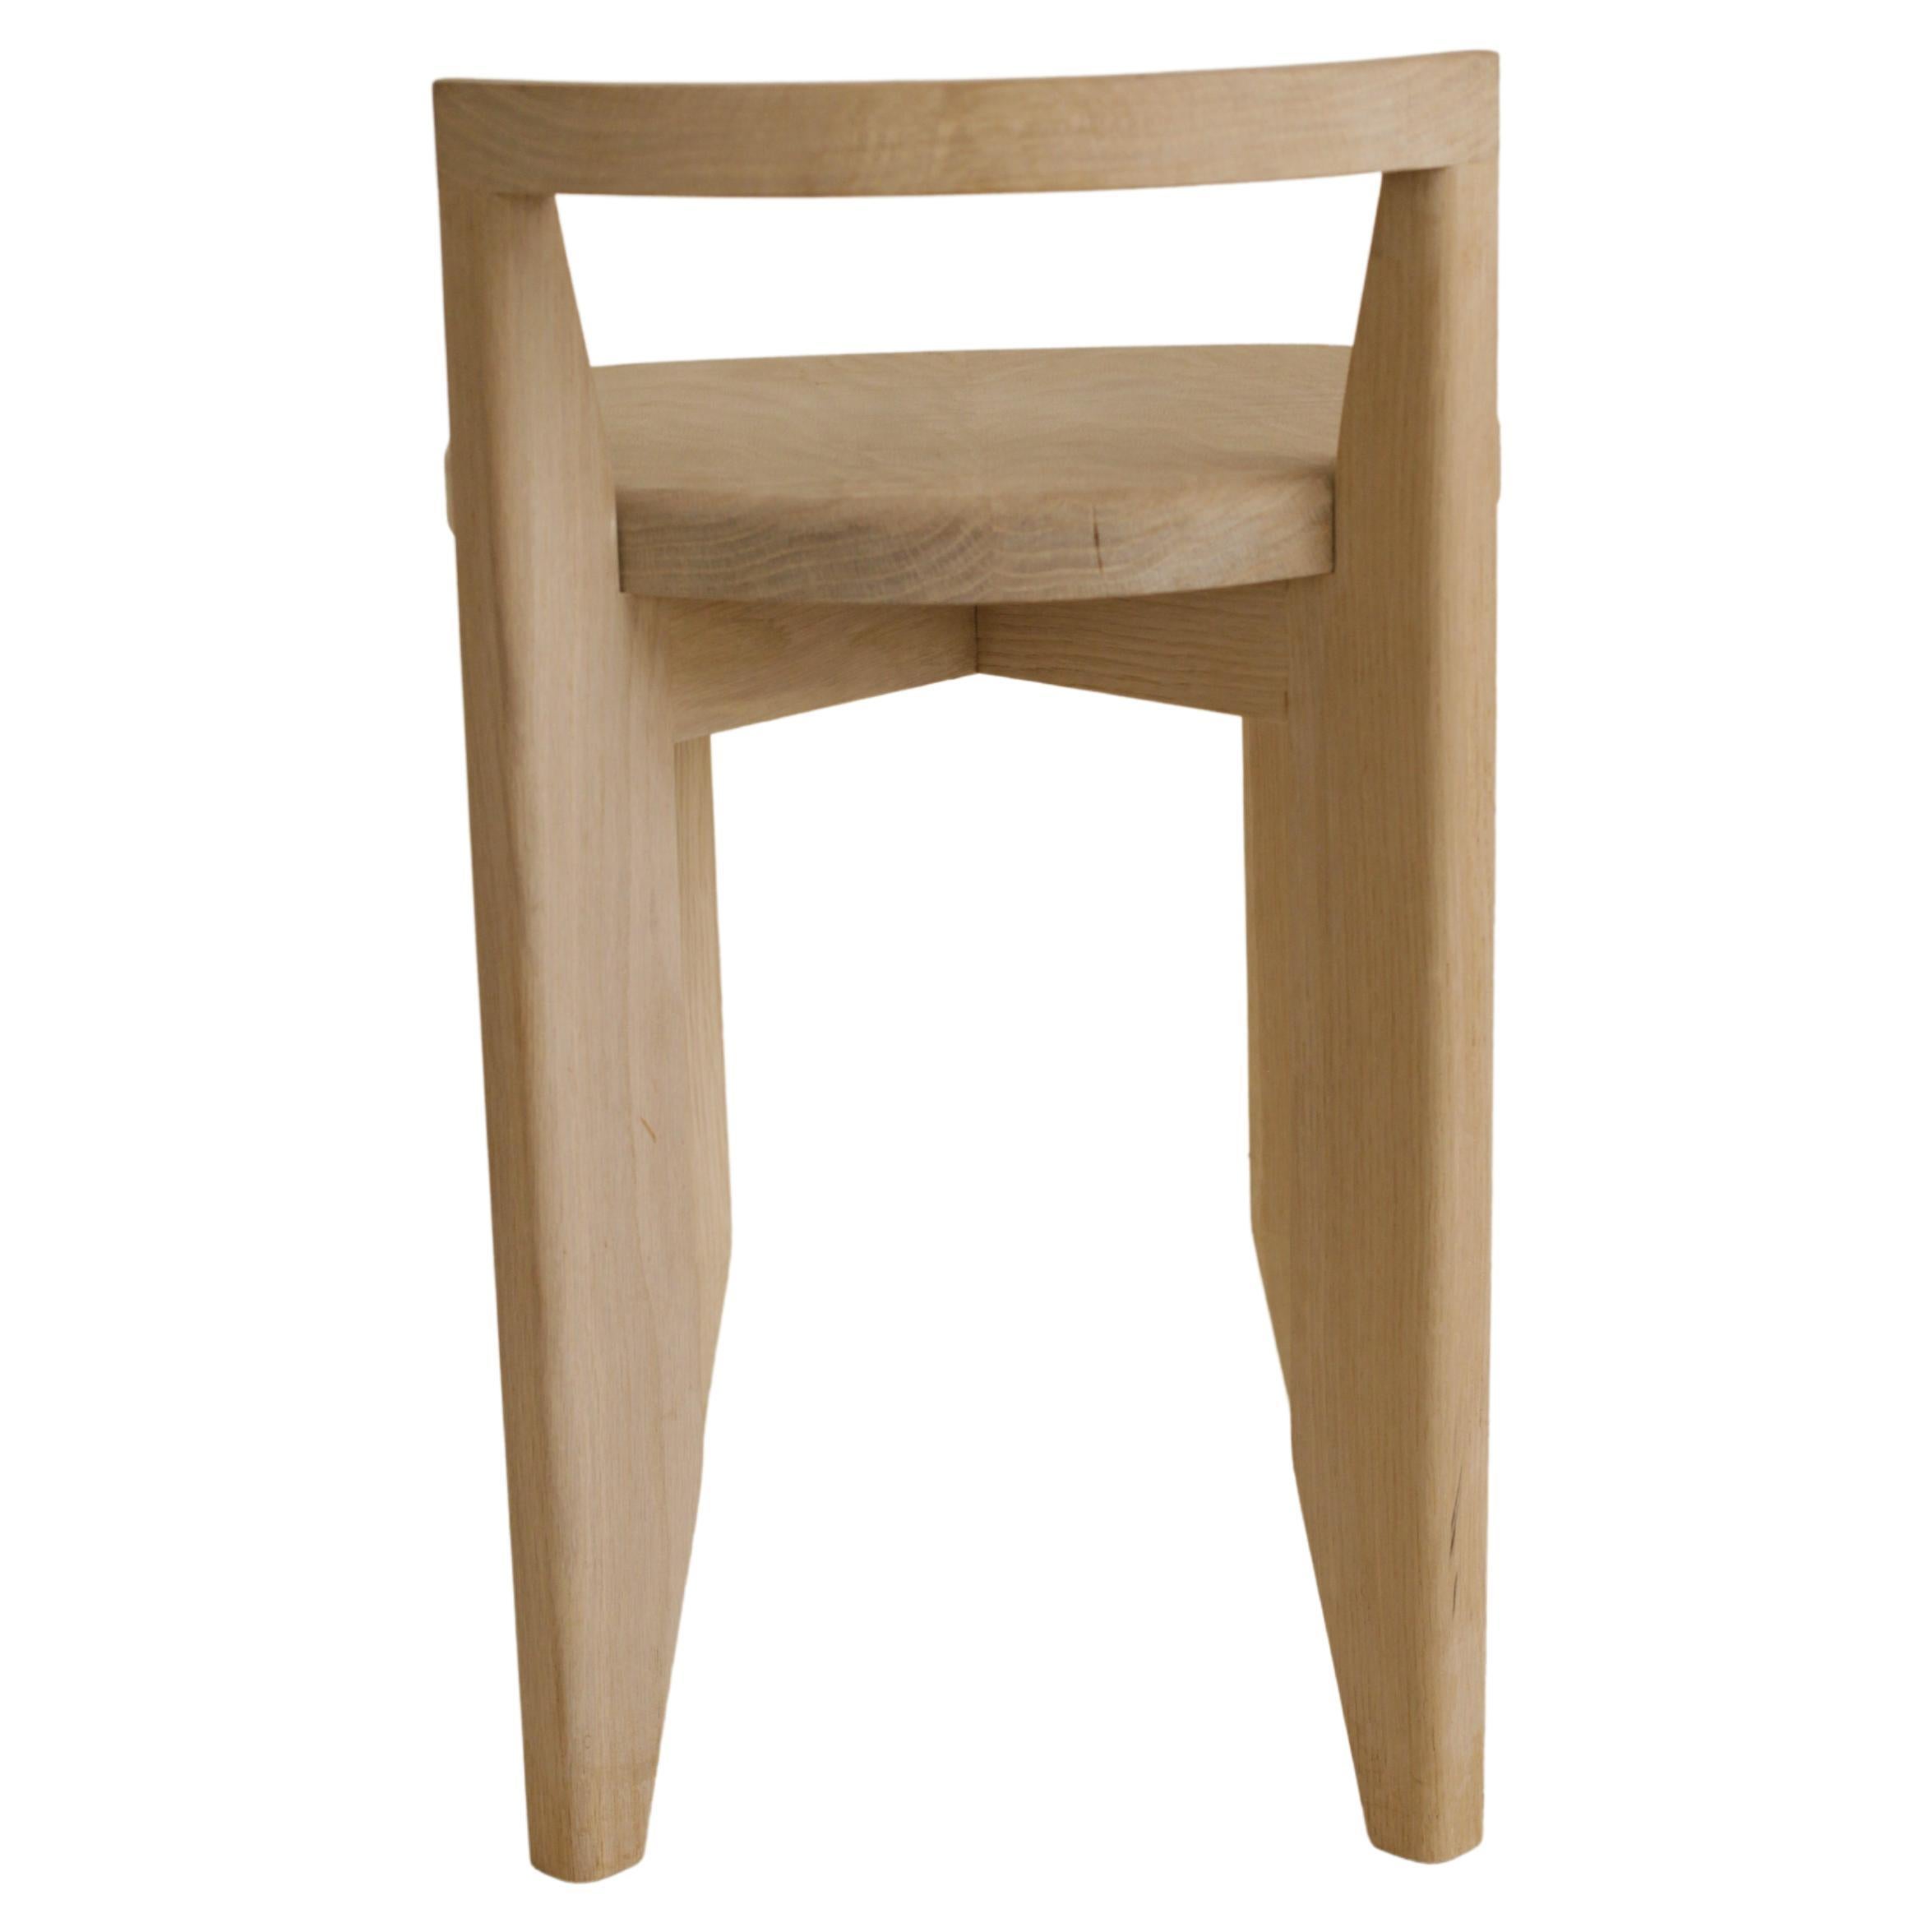 This low back chair / stool in solid oak was inspired by a Pierre Chapo upholstered chair and originally made as a gift for my partner. I love the visual weight lended by the thickness and size of the seat juxtaposed with the sharp tapers of the